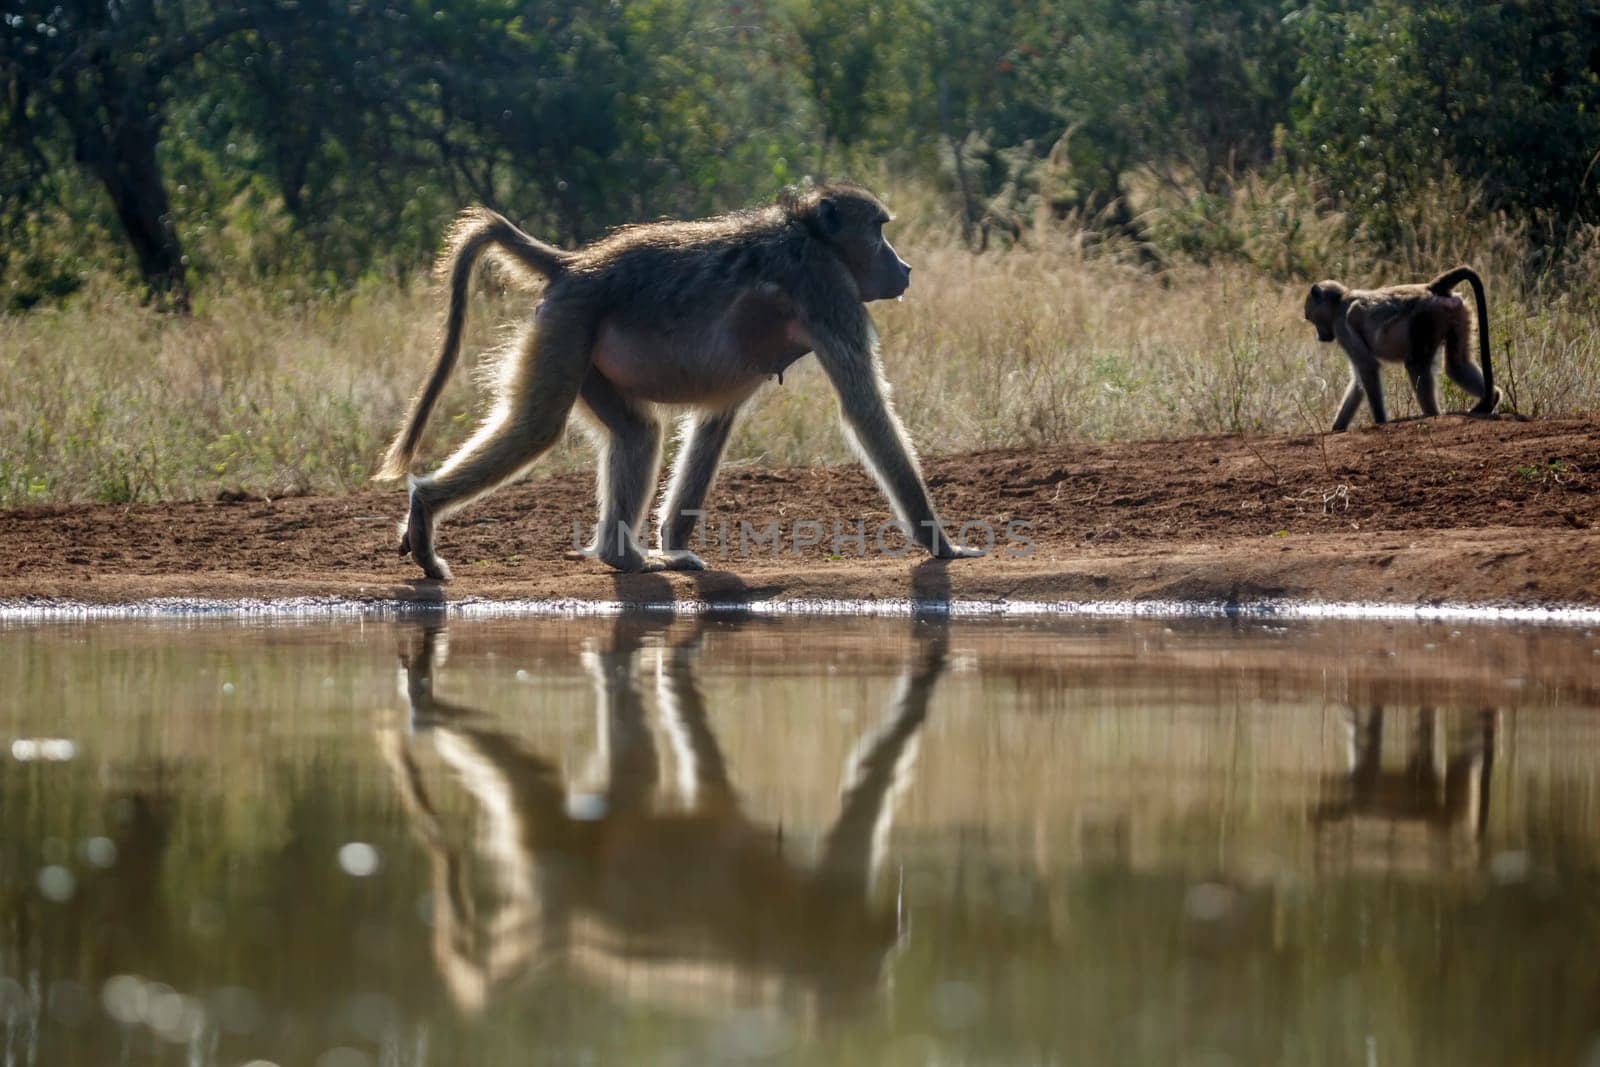 Chacma baboon walking backlit along waterhole in Kruger National park, South Africa ; Specie Papio ursinus family of 